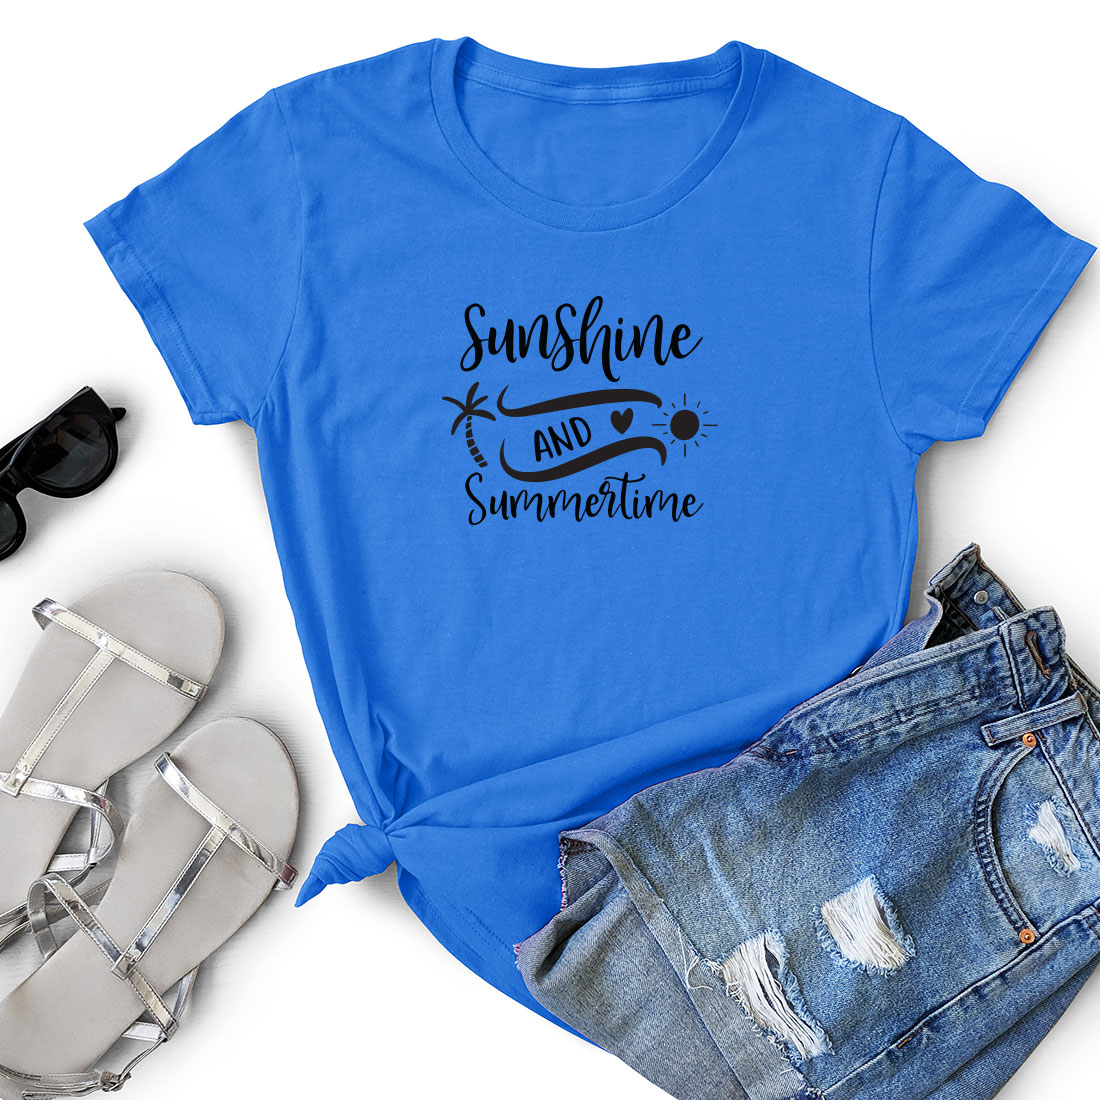 T - shirt that says sunshine and summertime next to a pair of shorts.